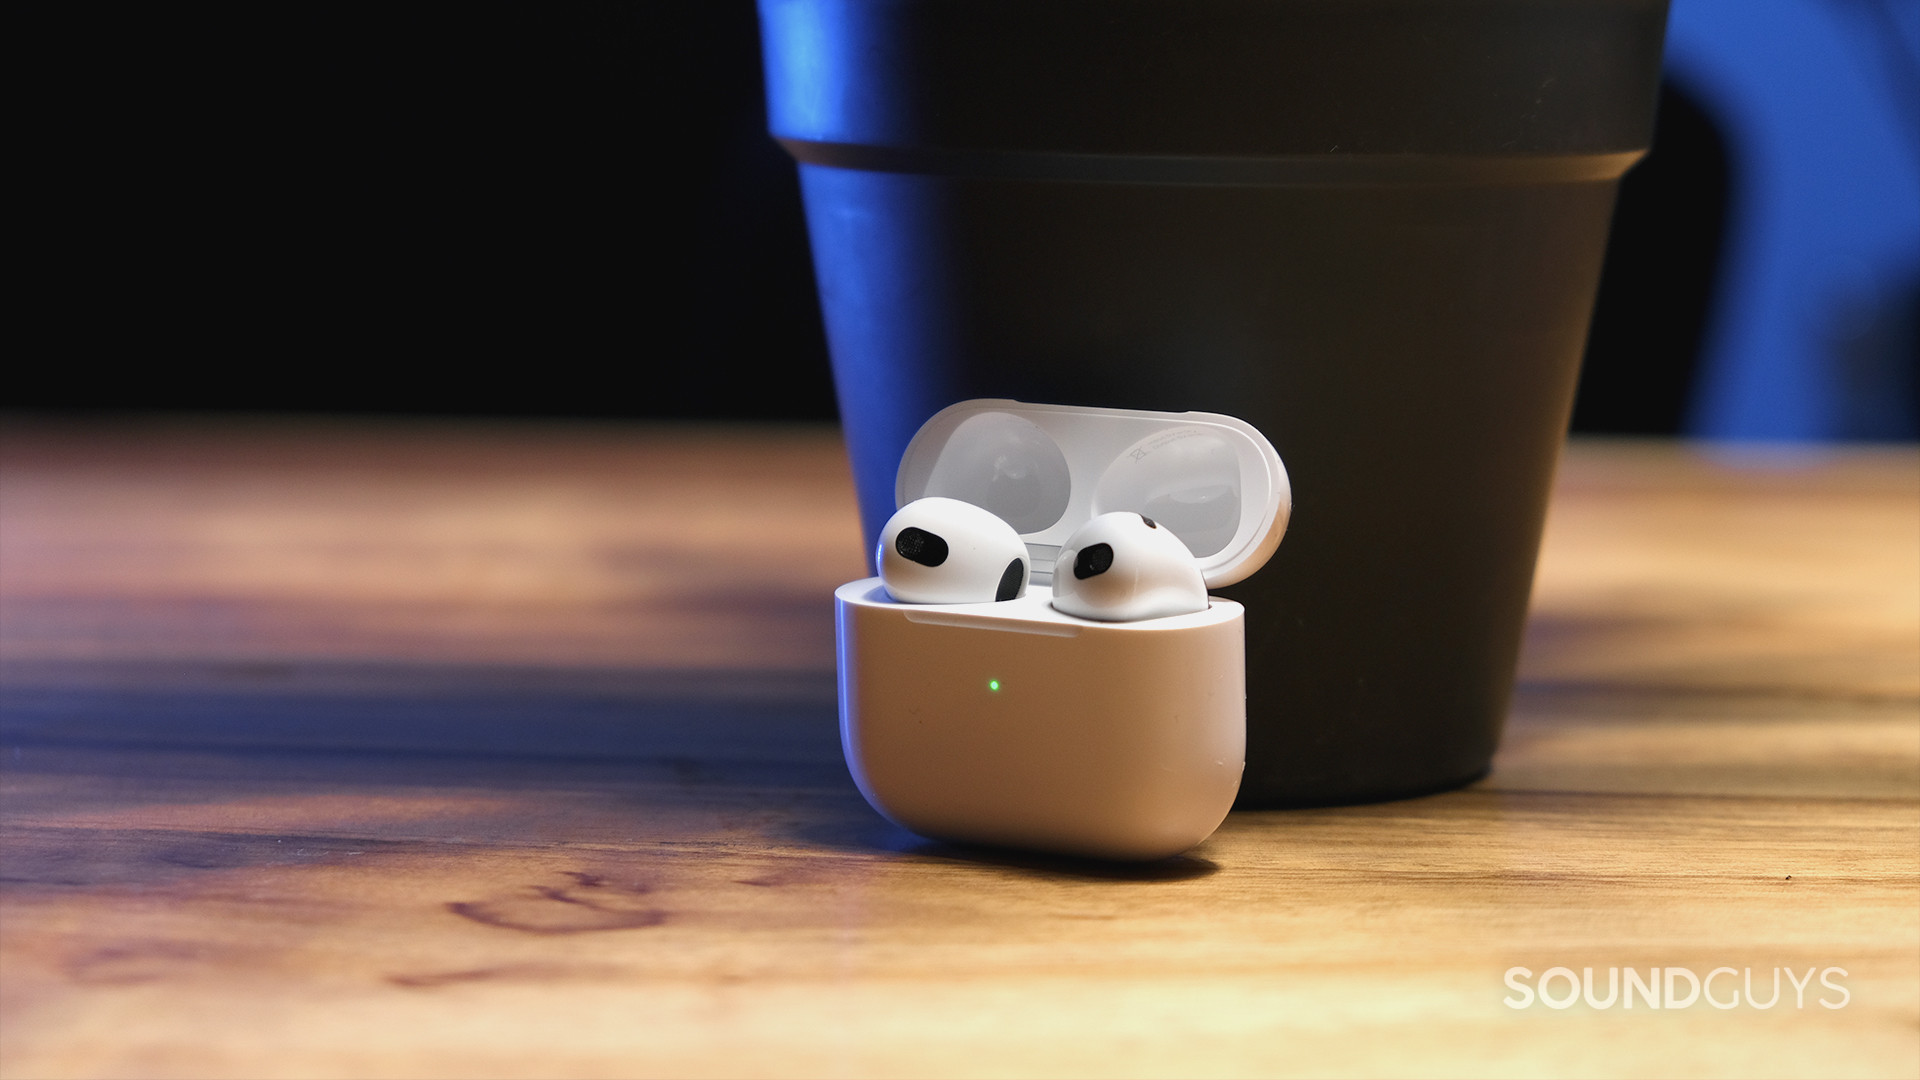 The AirPods 3rd Generation in their case sitting in front of a potted plant on a wood table.